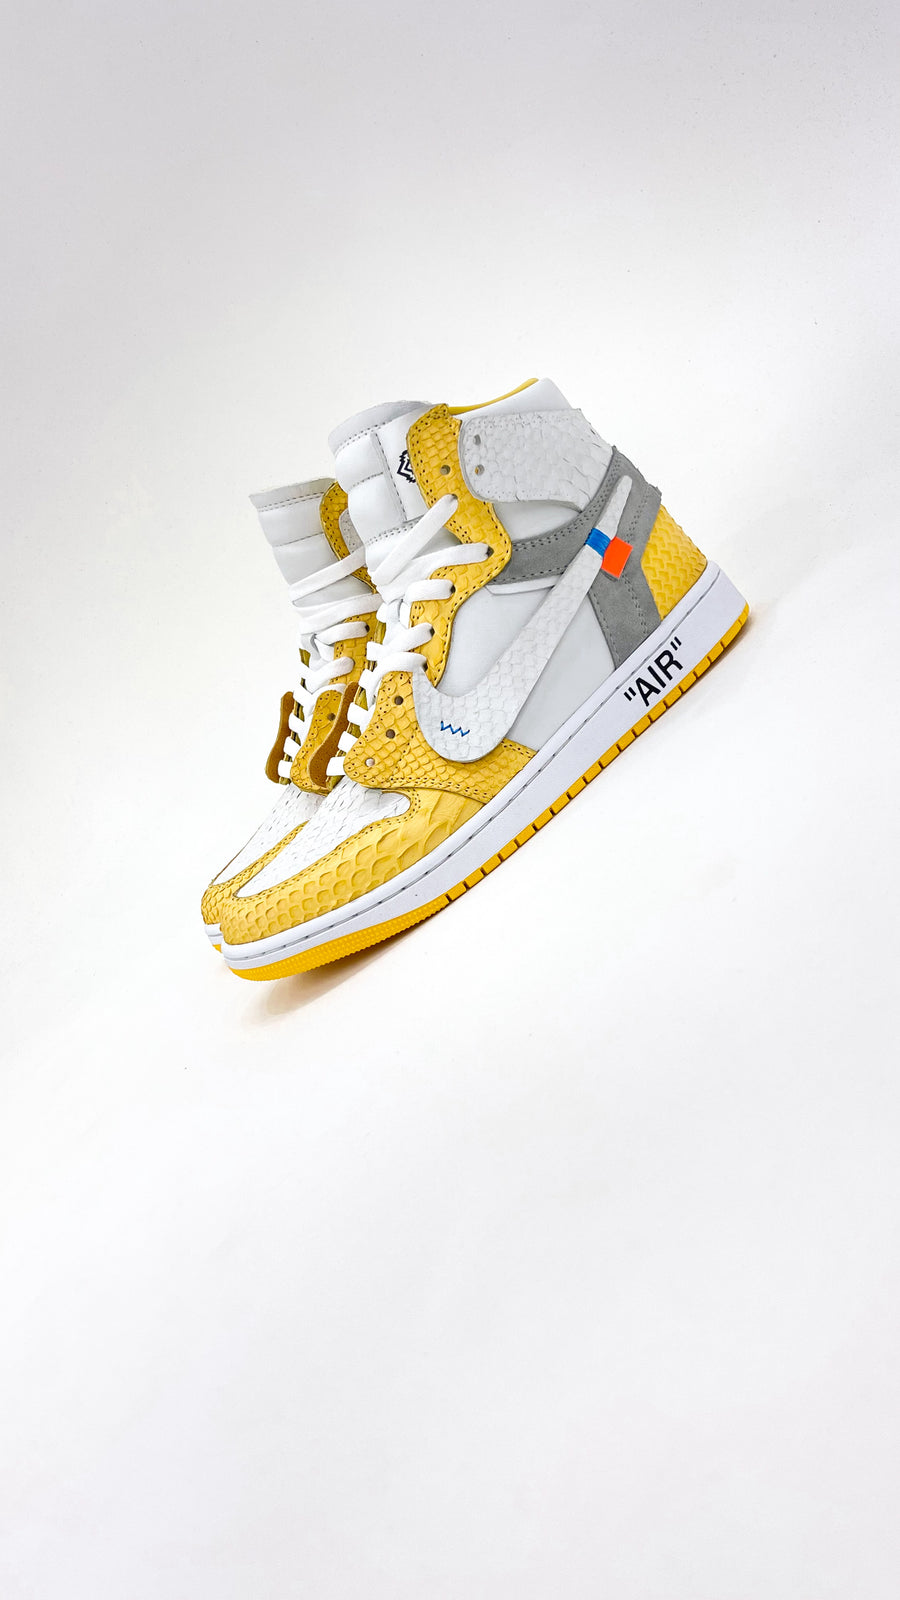 “CANARY” J1 OFF WHITE